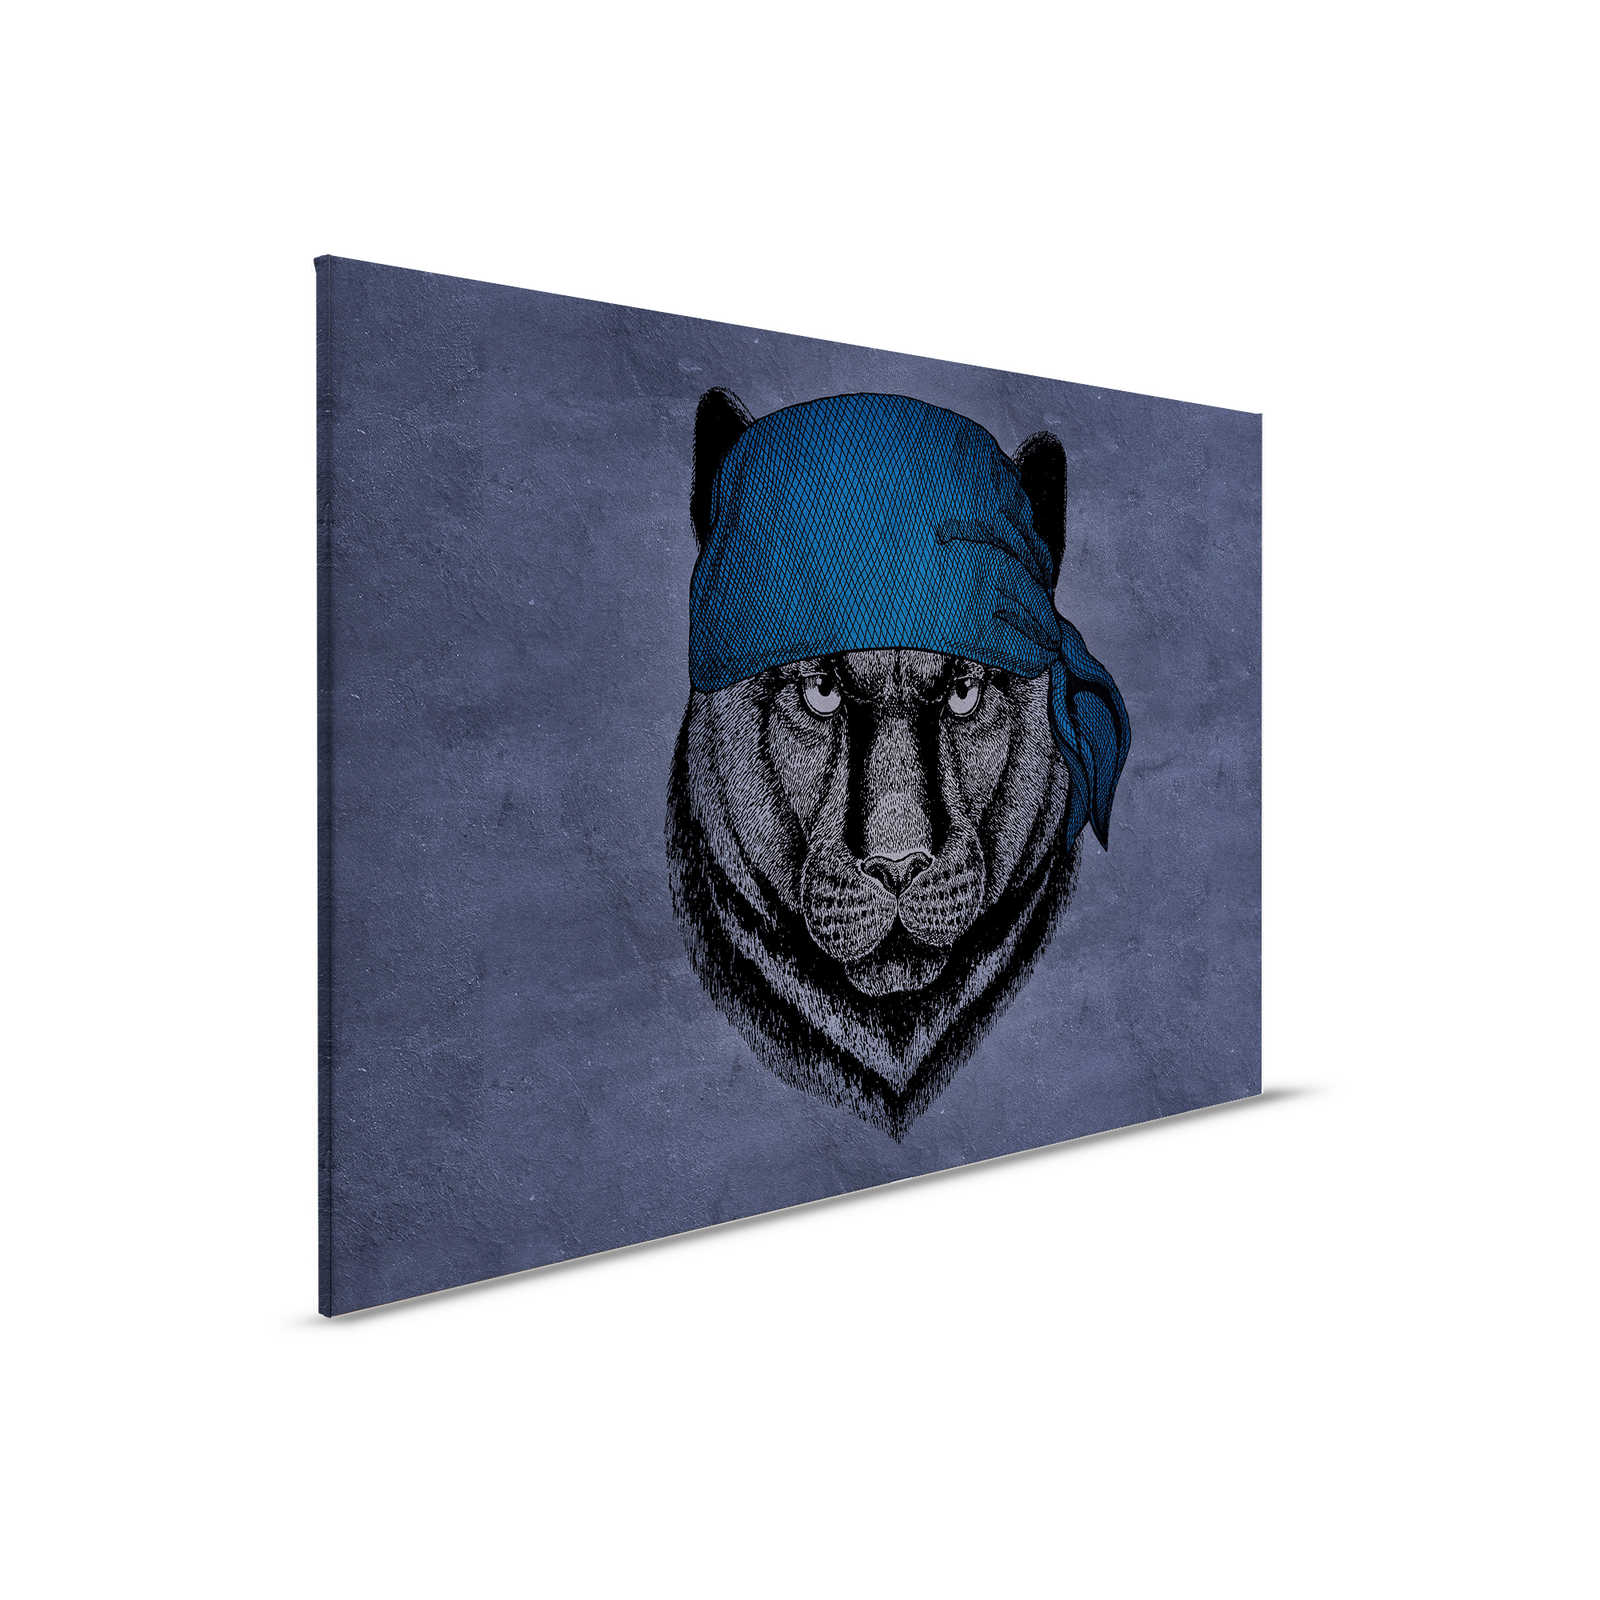         Canvas painting Panther in Pirate Look - 0,90 m x 0,60 m
    